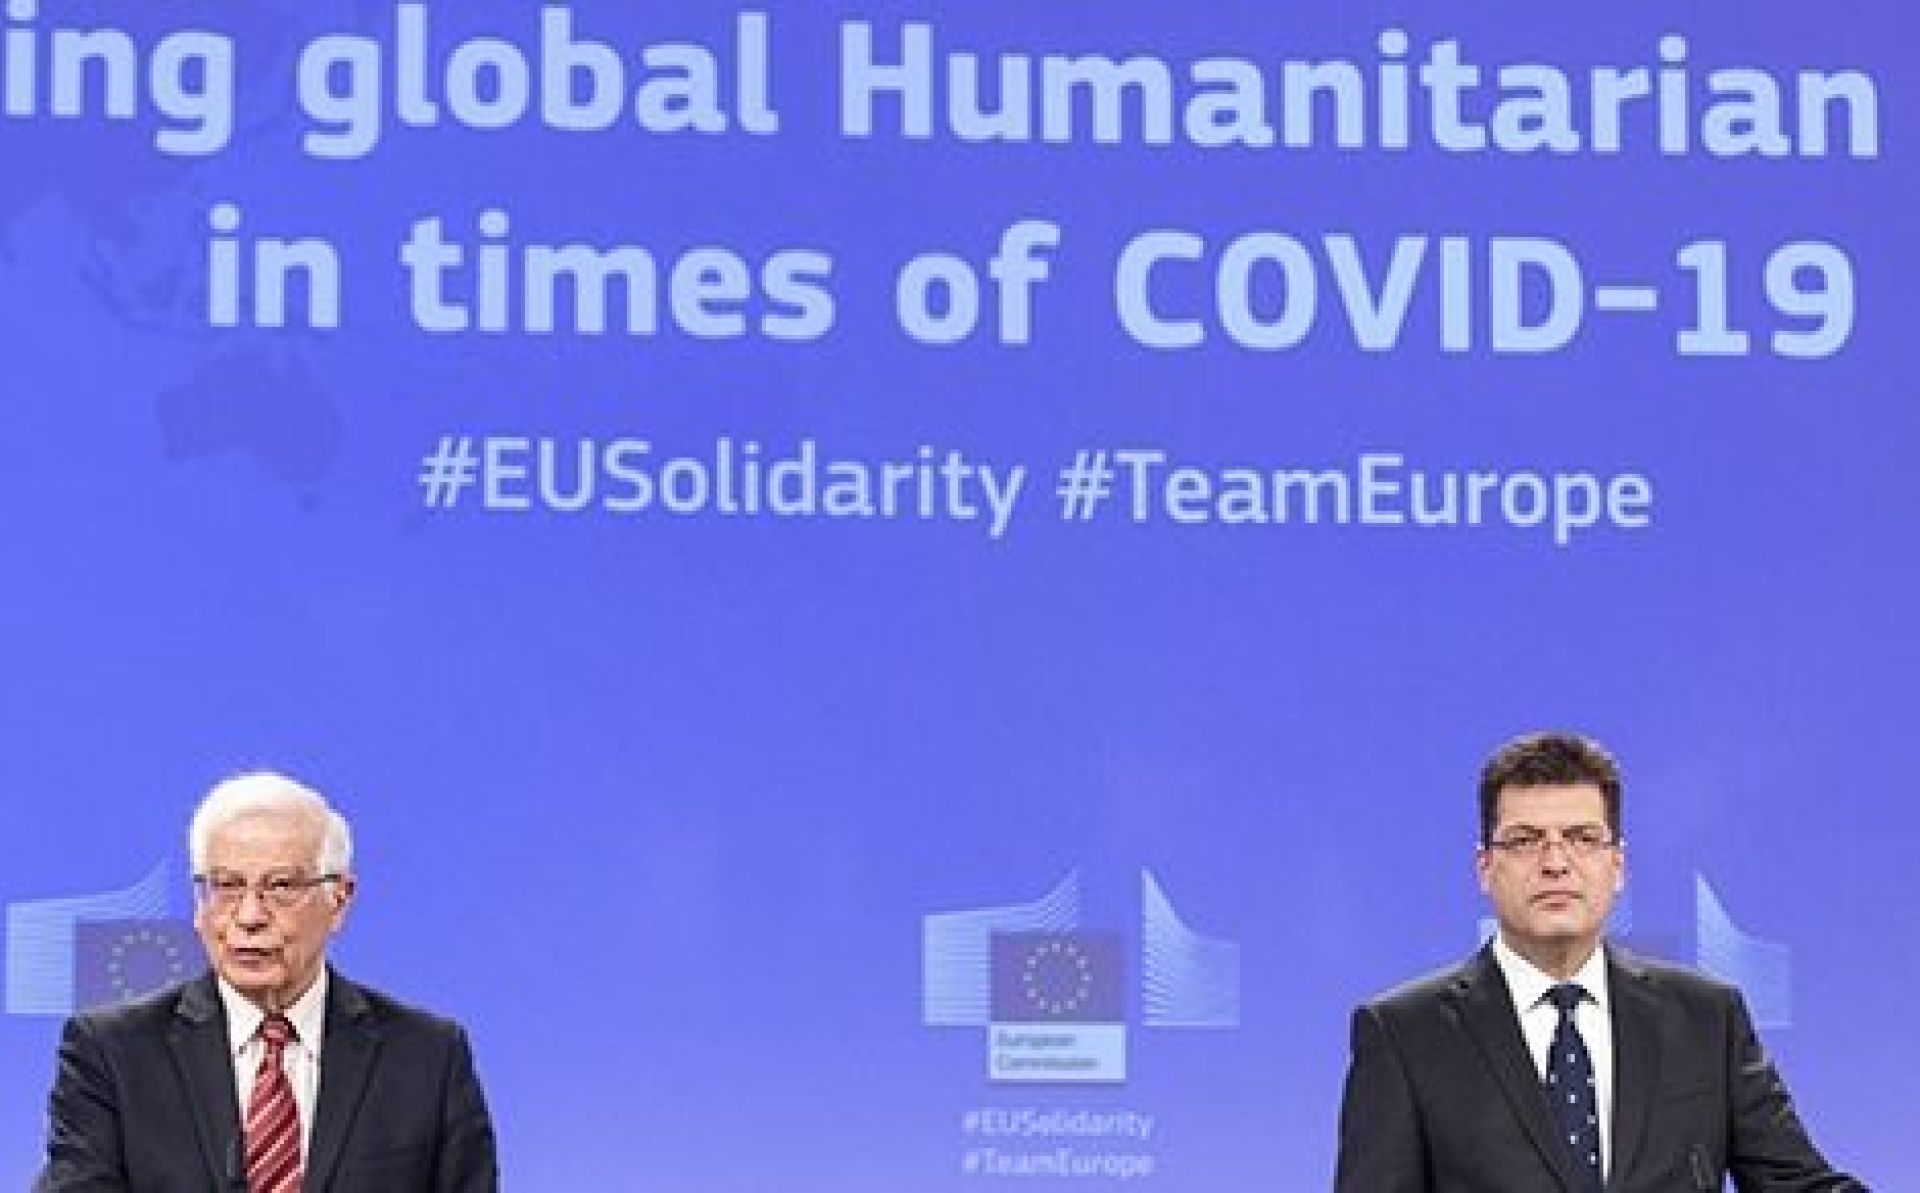 Humanitarian action: New outlook for EU’s global aid delivery challenged by COVID-19